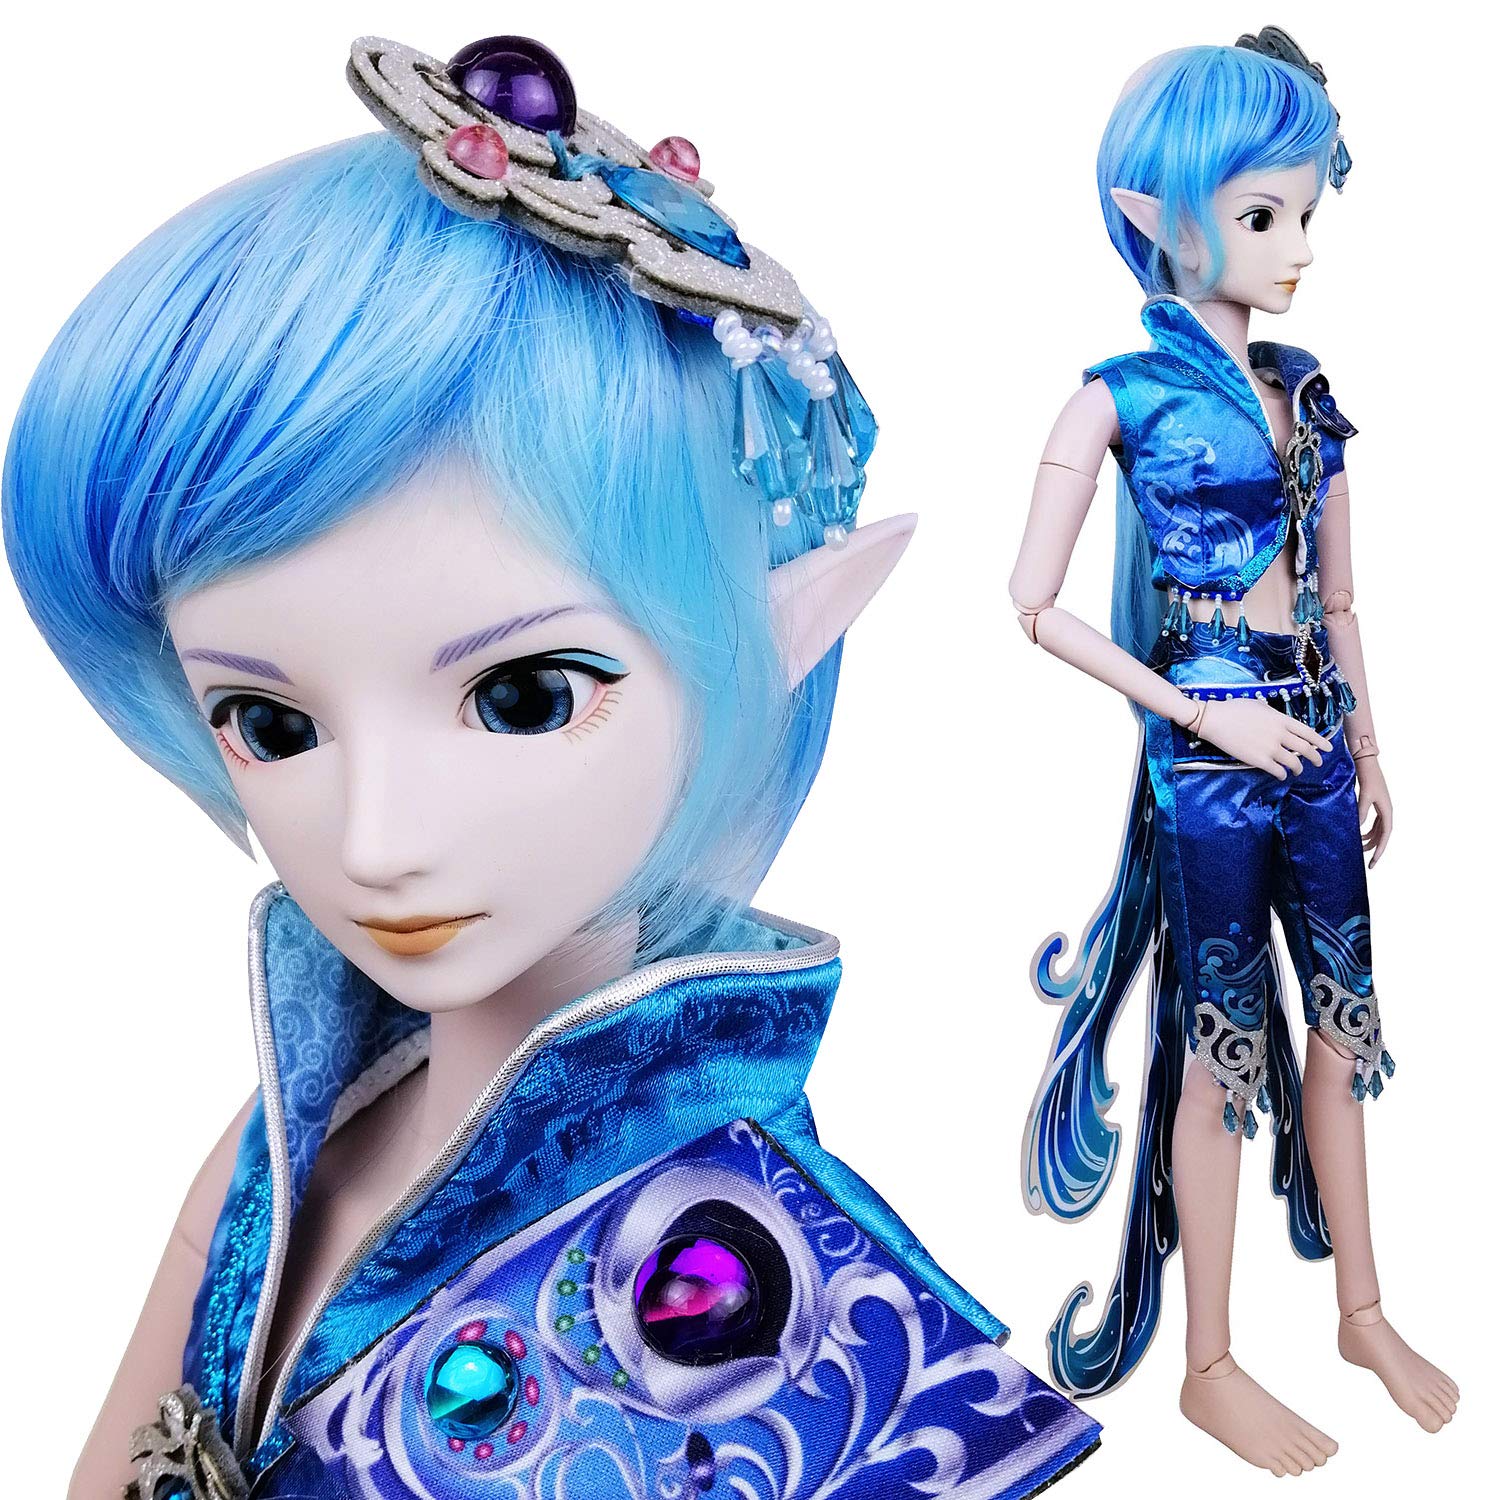 EVA BJD Water Prince Poseidon 1/3 BJD Doll Full Set 24inch 19 Ball Jointed Dolls Elf Ears + Clothes + Free Makeup + Hair + Accessories